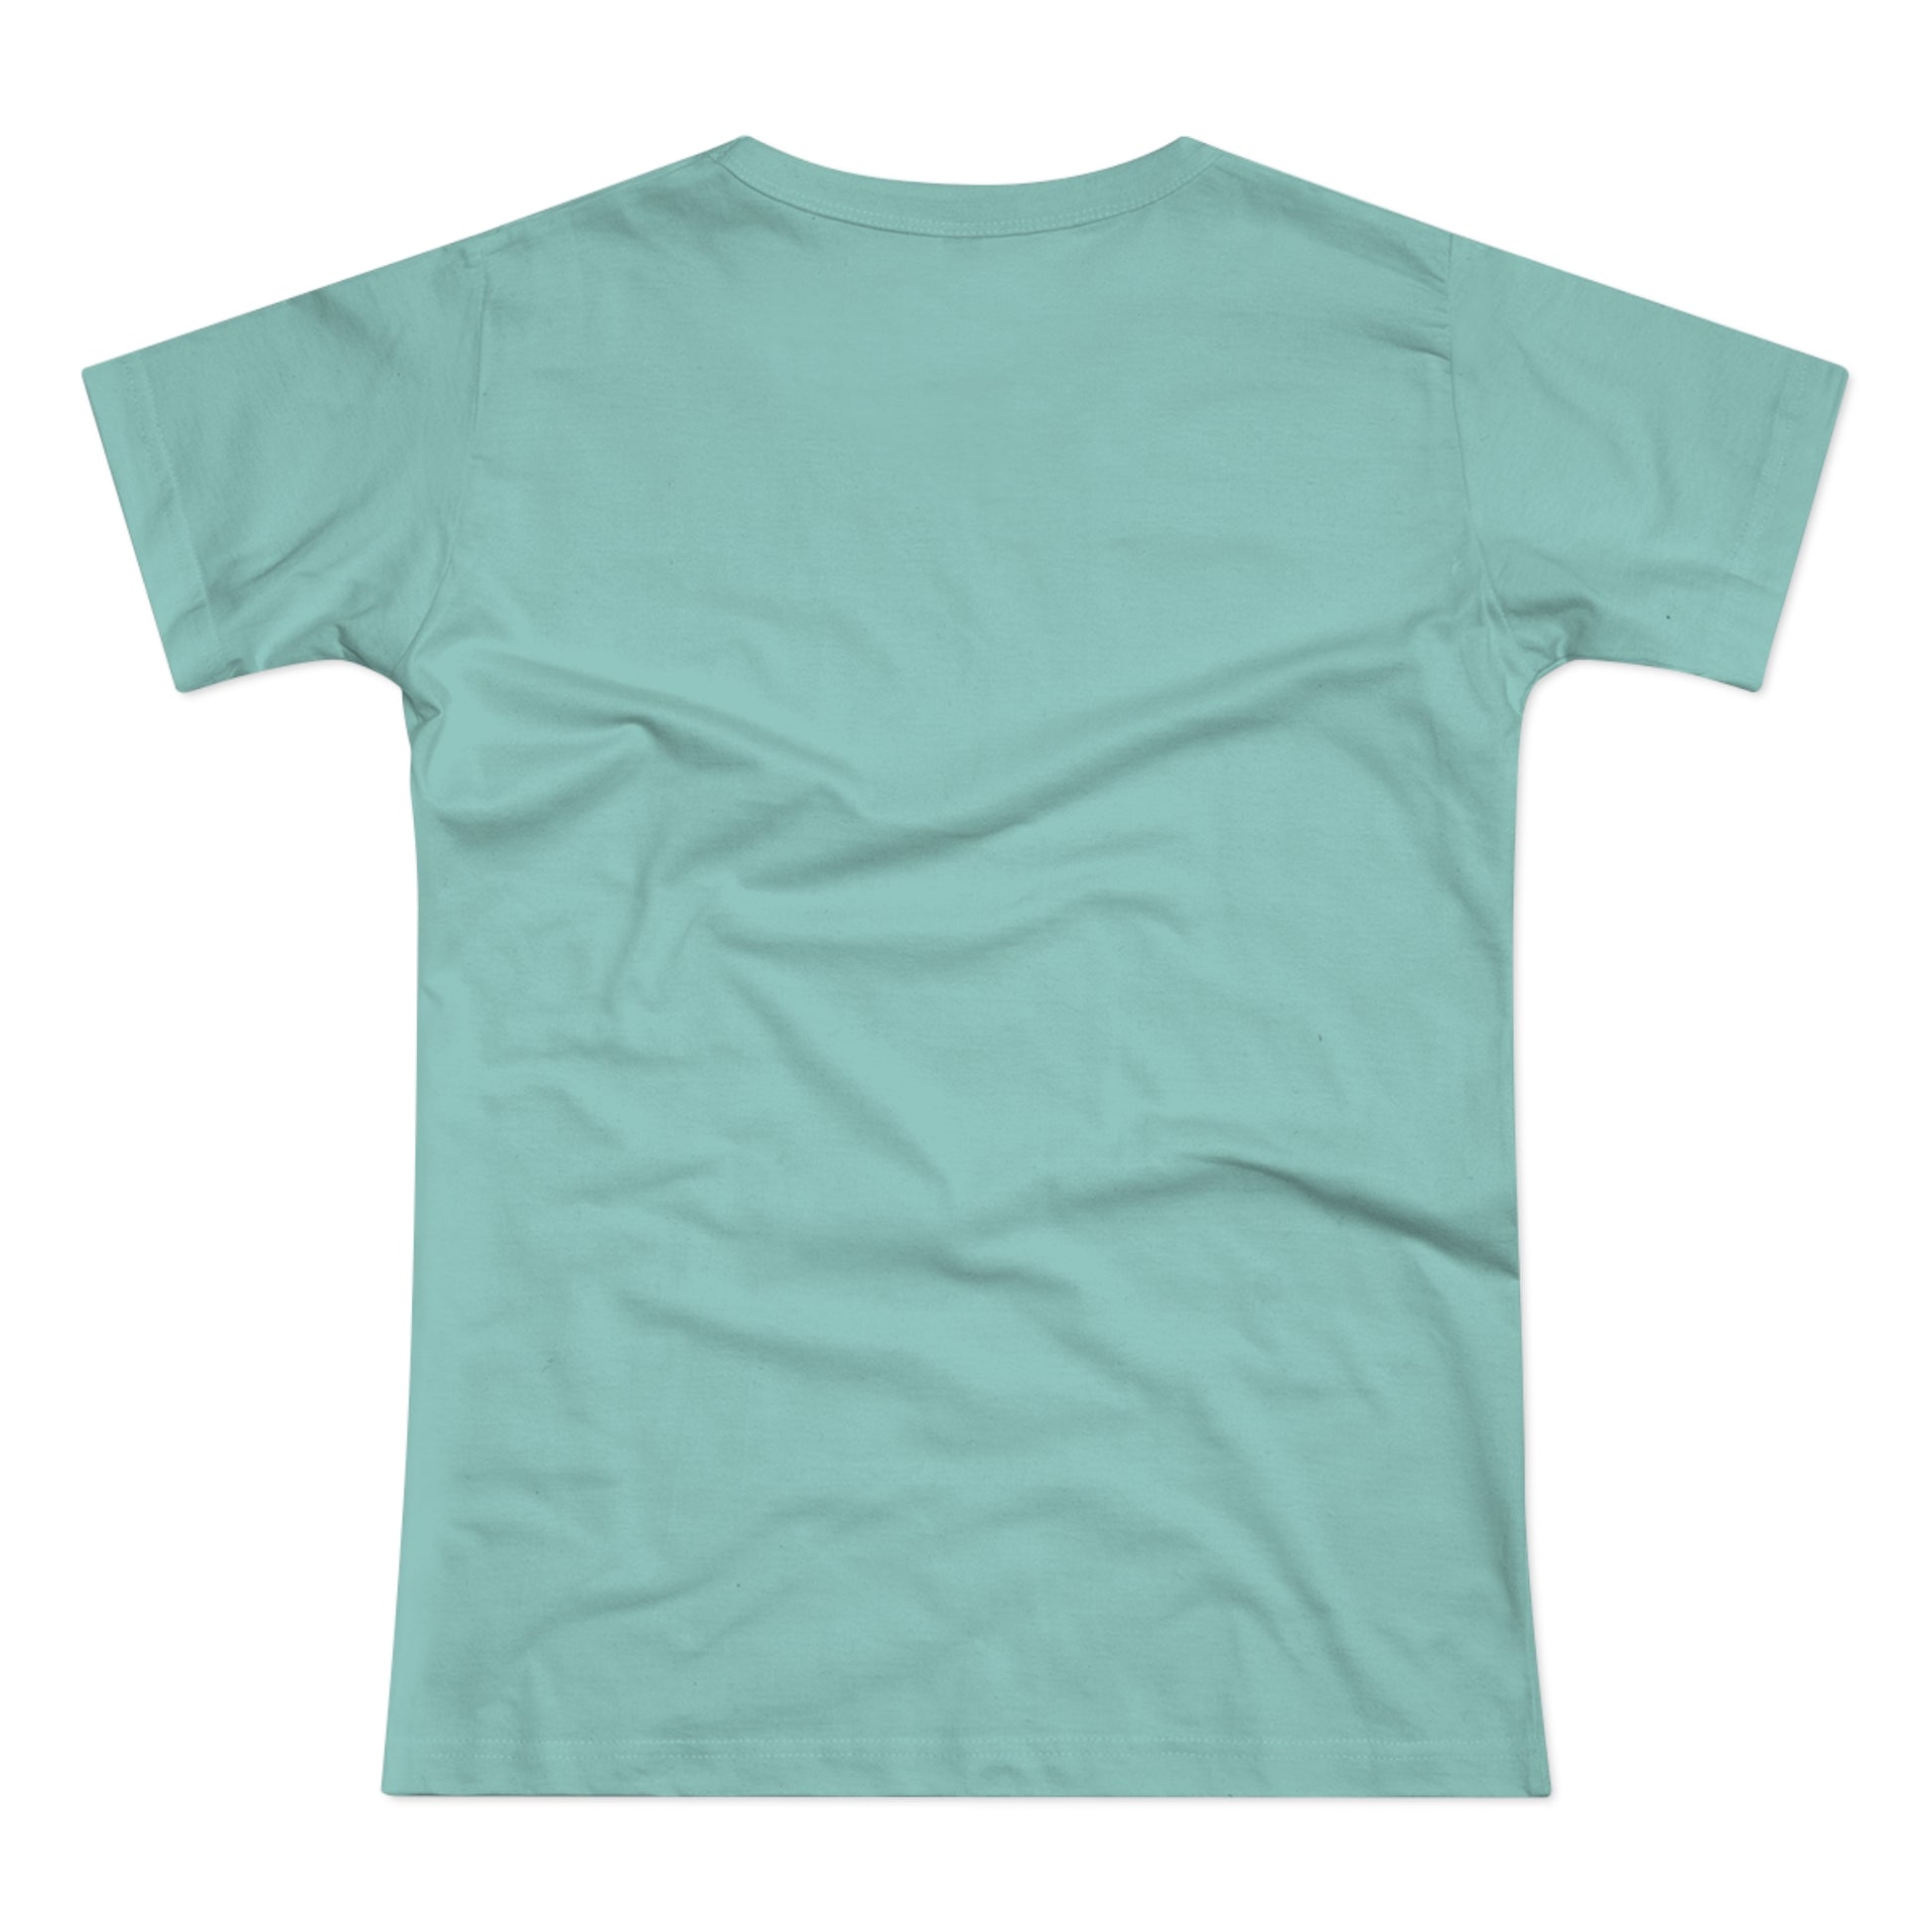 a light green t - shirt with a white background